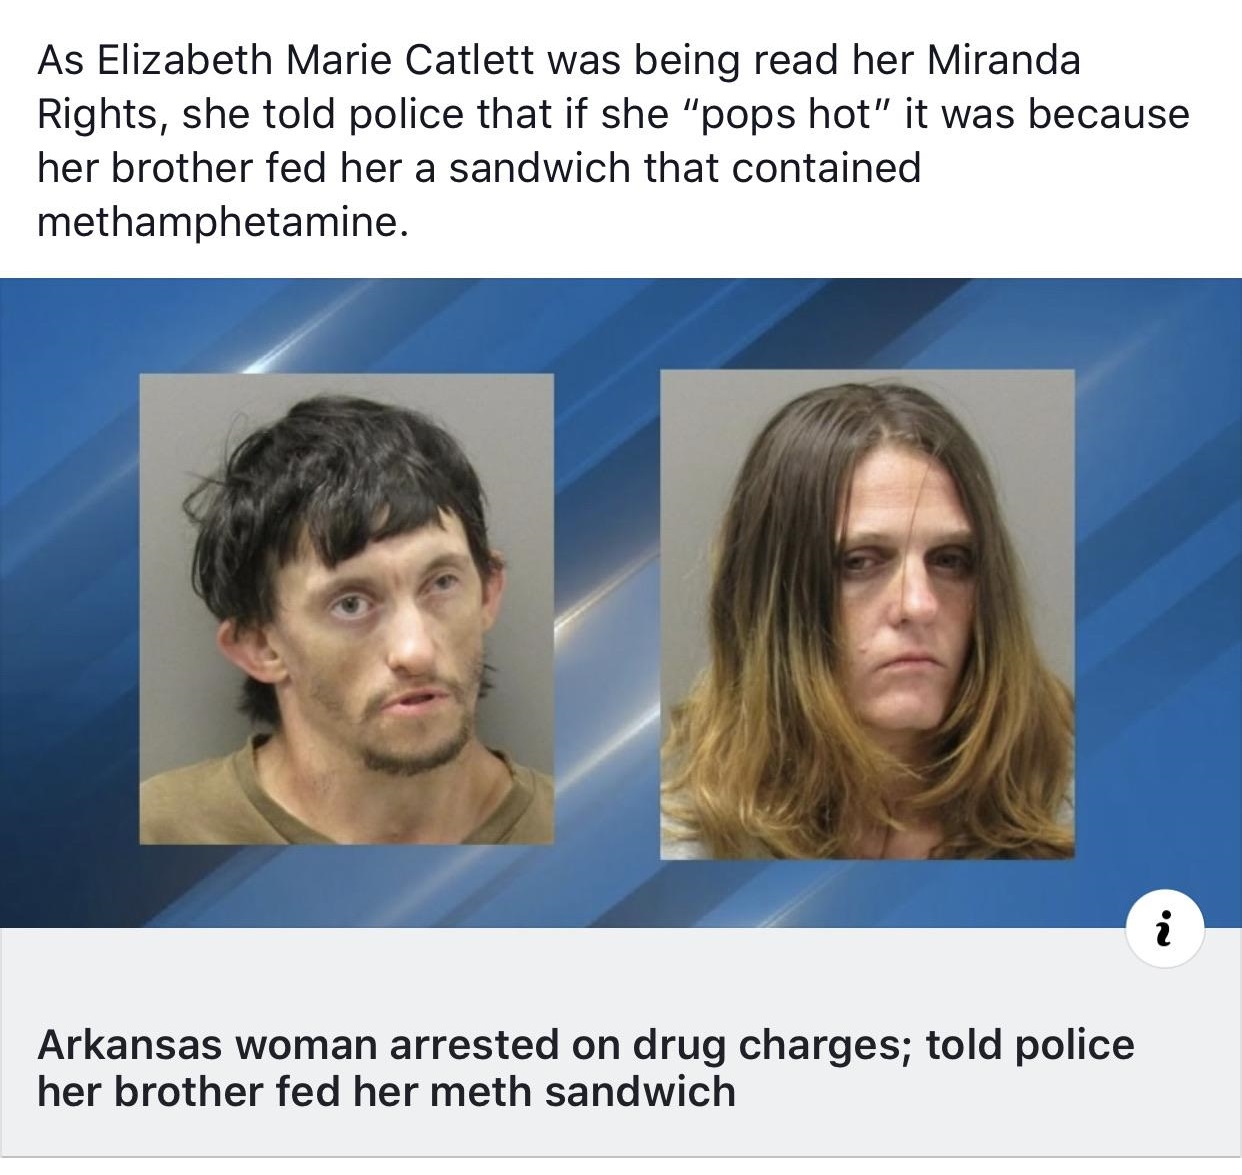 jaw - As Elizabeth Marie Catlett was being read her Miranda Rights, she told police that if she "pops hot" it was because her brother fed her a sandwich that contained methamphetamine. Arkansas woman arrested on drug charges; told police her brother fed h